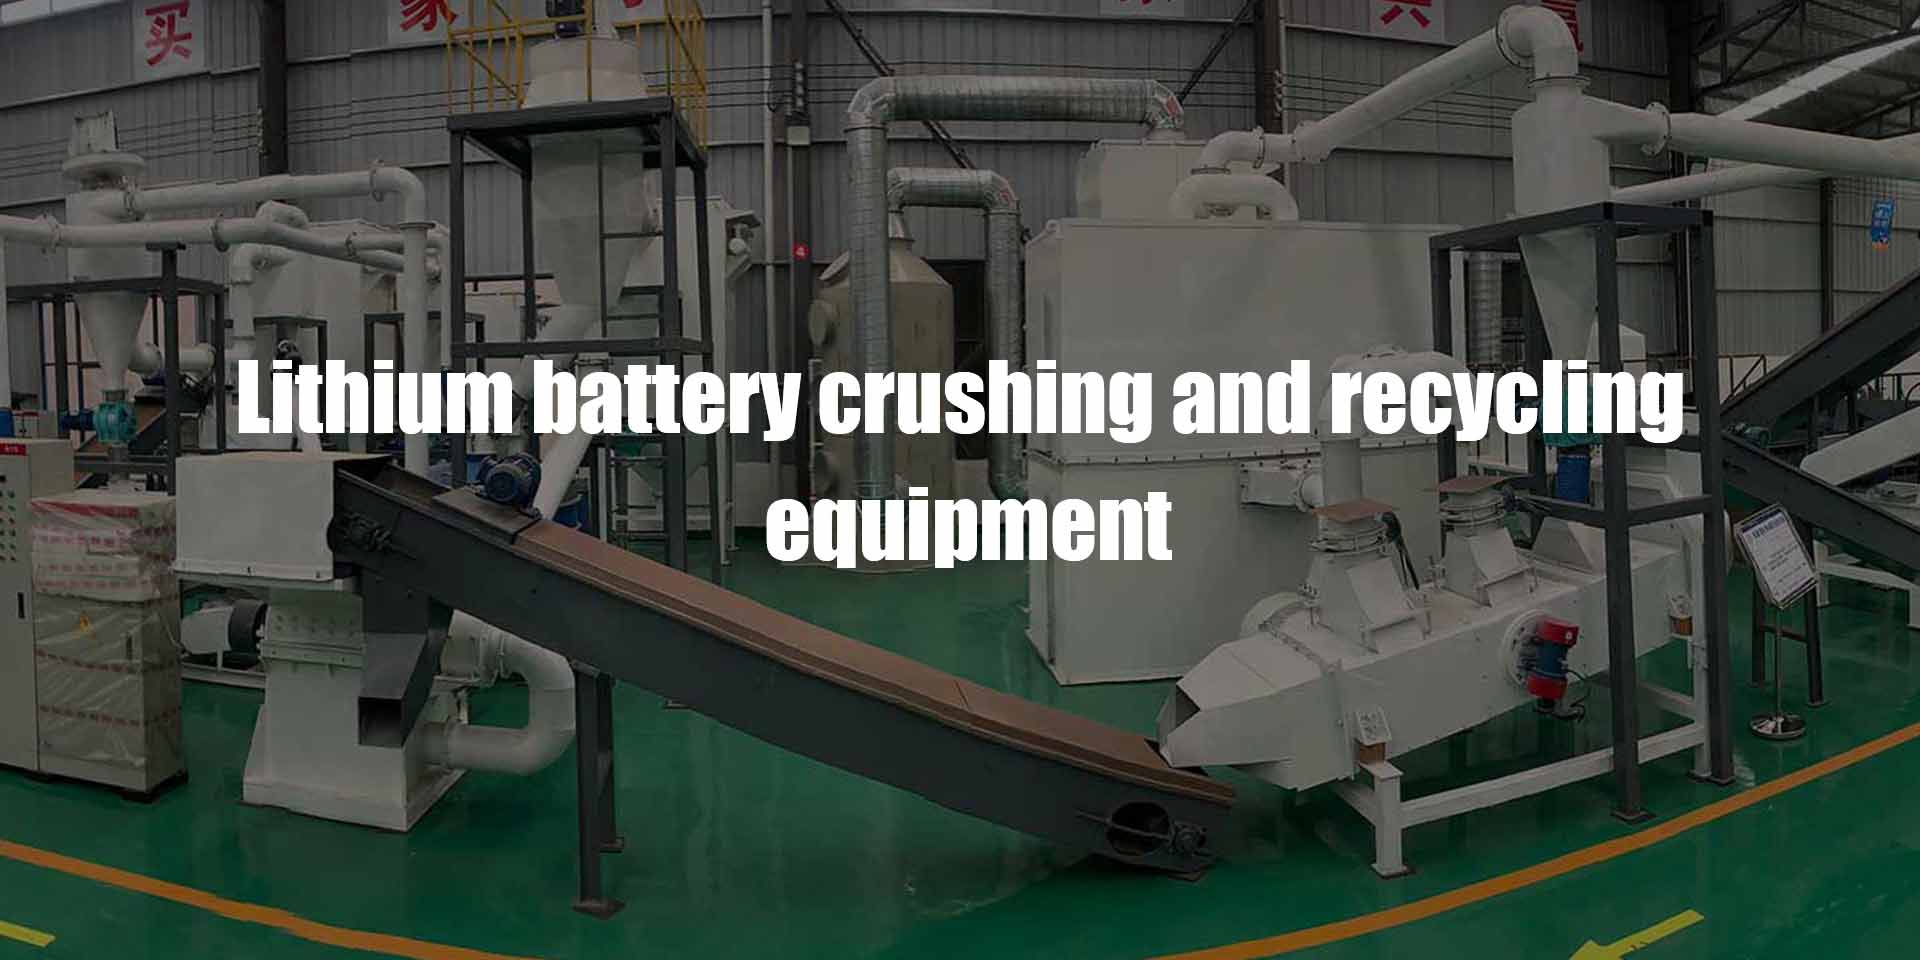 Lithium battery recycling machine